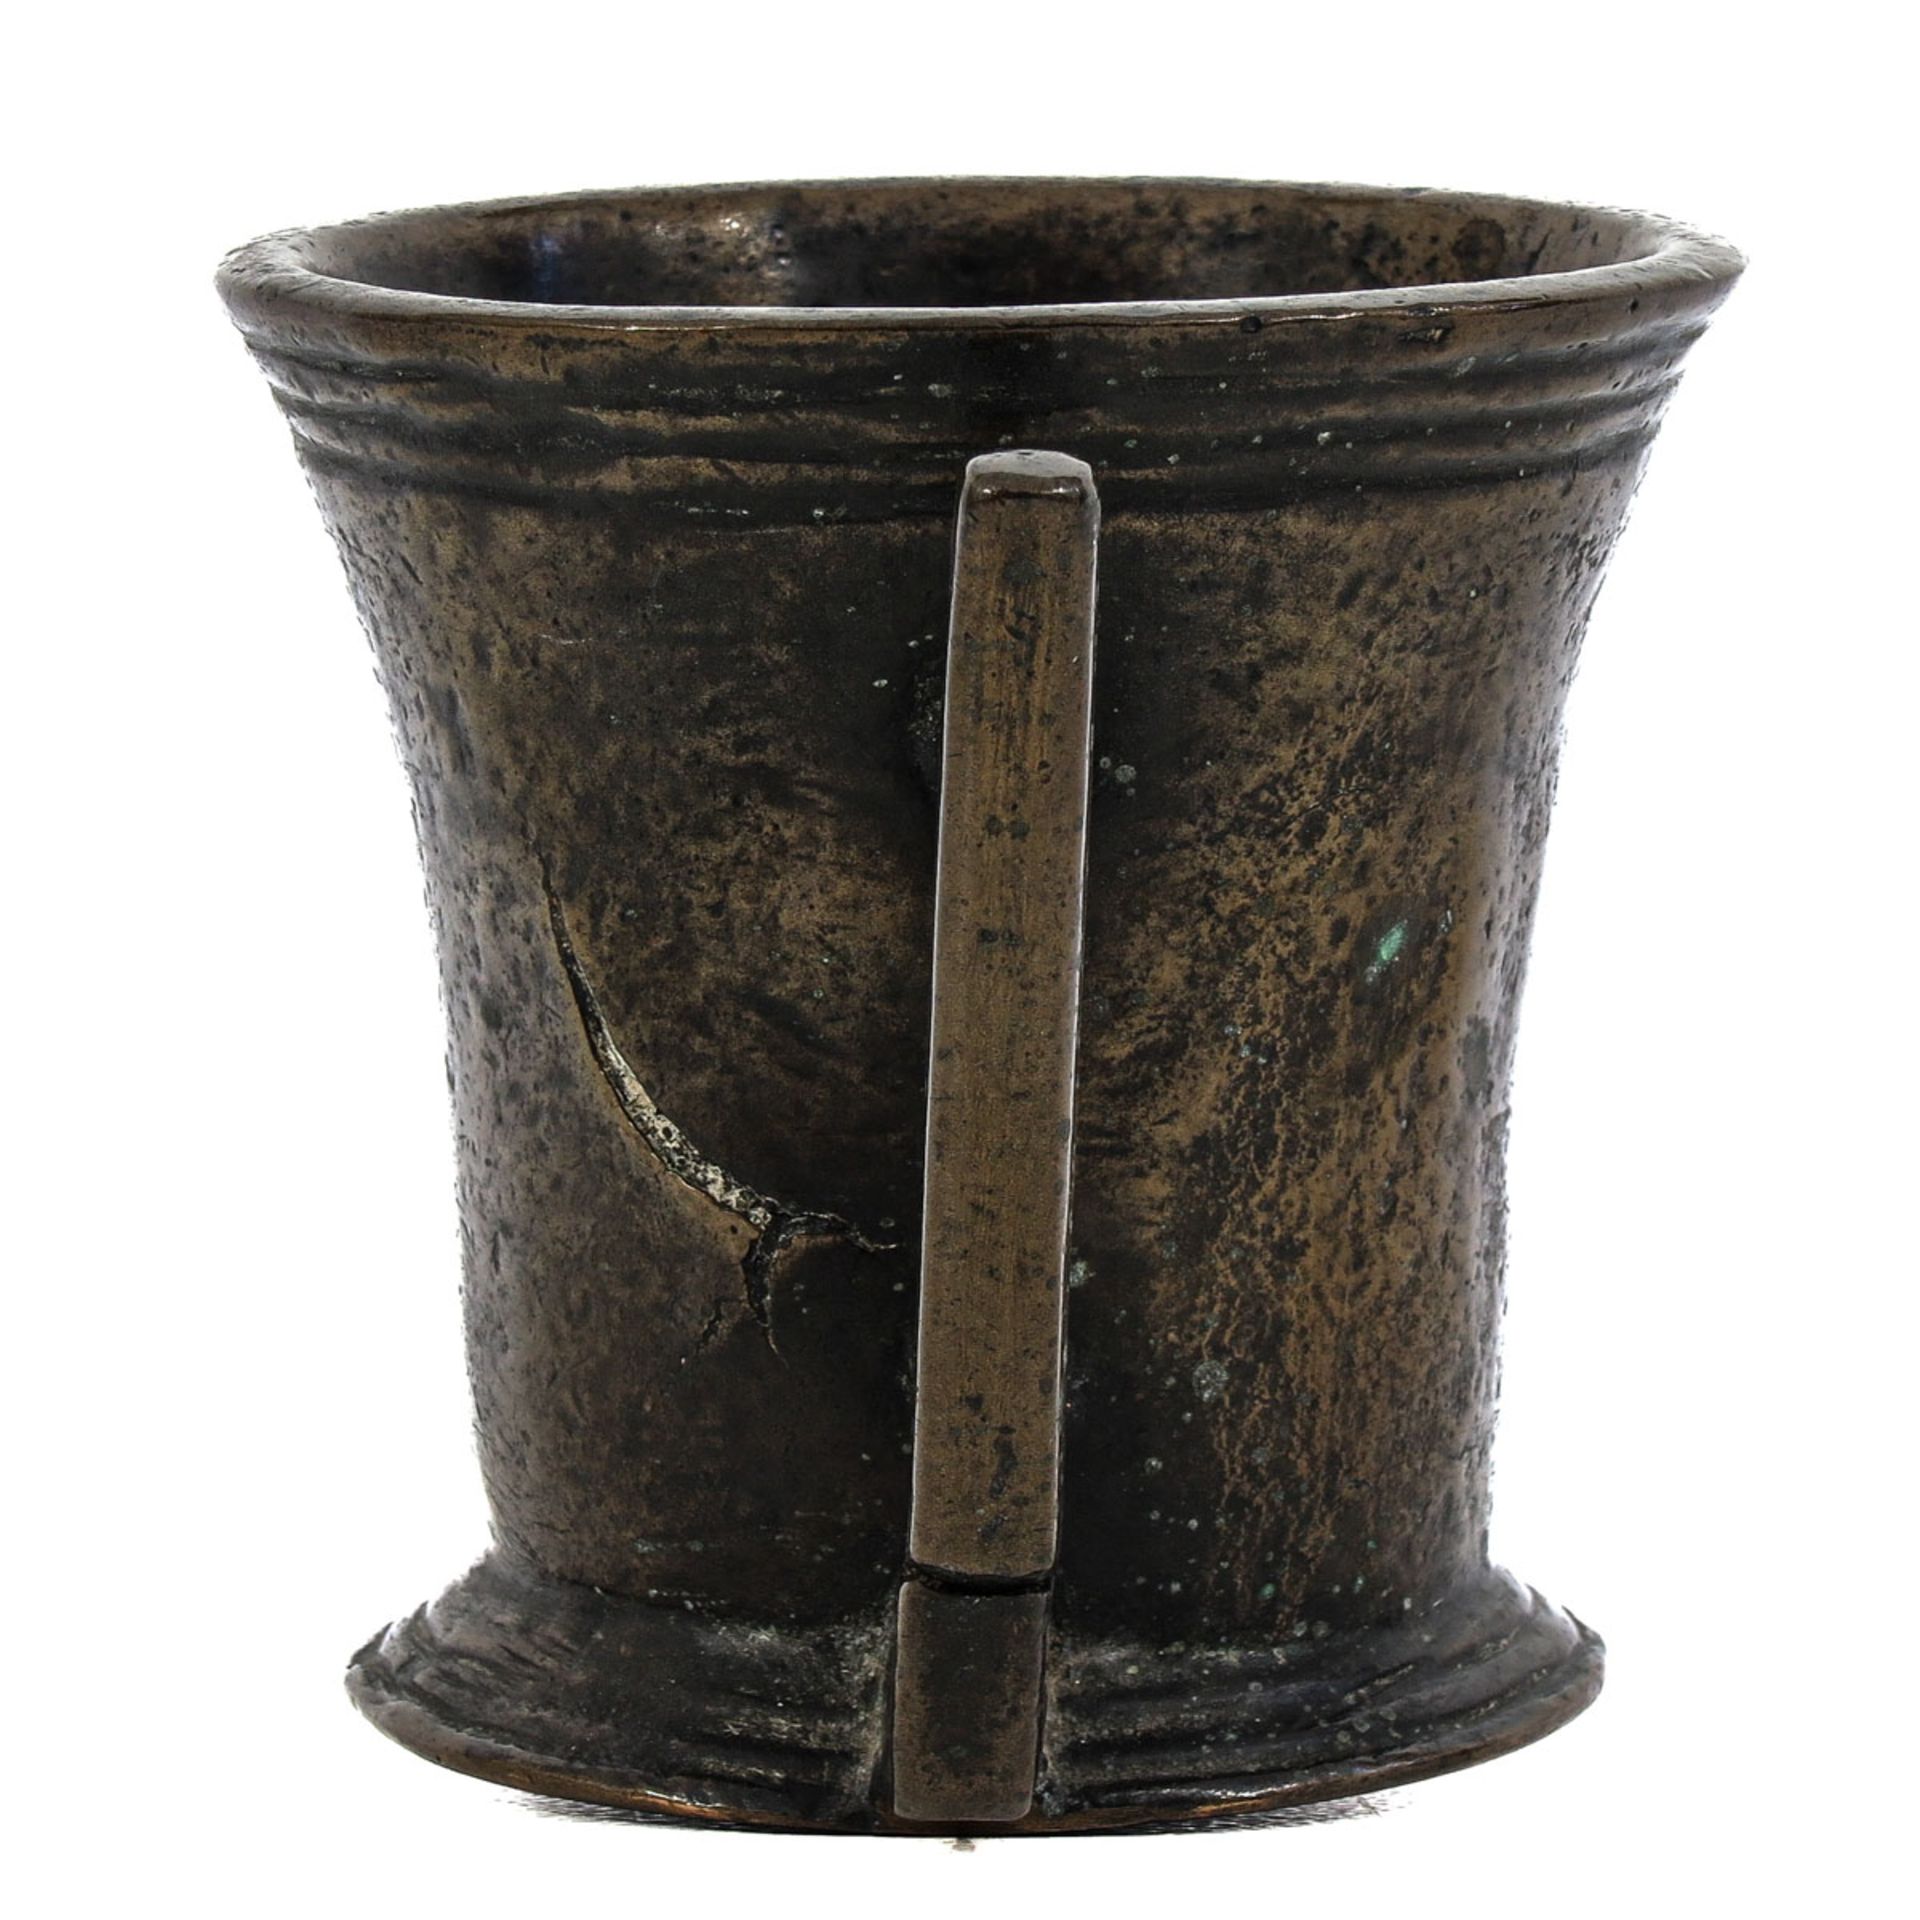 A 16th Century Mortar - Image 2 of 8